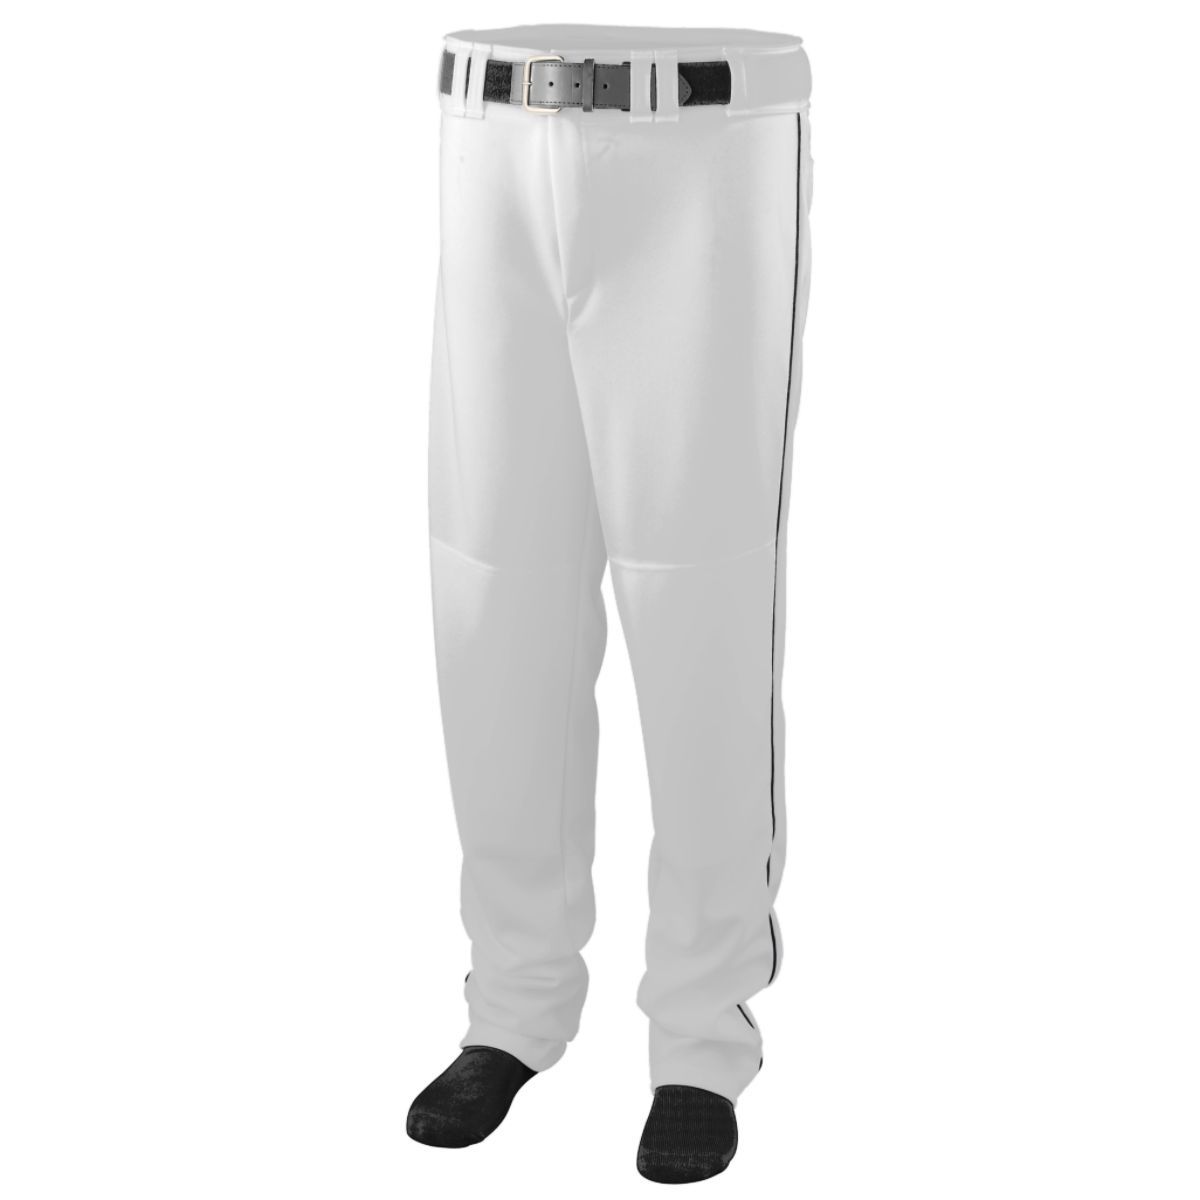 Augusta Sportswear Youth Series Baseball/Softball Pant With Piping in White/Black  -Part of the Youth, Youth-Pants, Pants, Augusta-Products, Baseball, All-Sports, All-Sports-1 product lines at KanaleyCreations.com